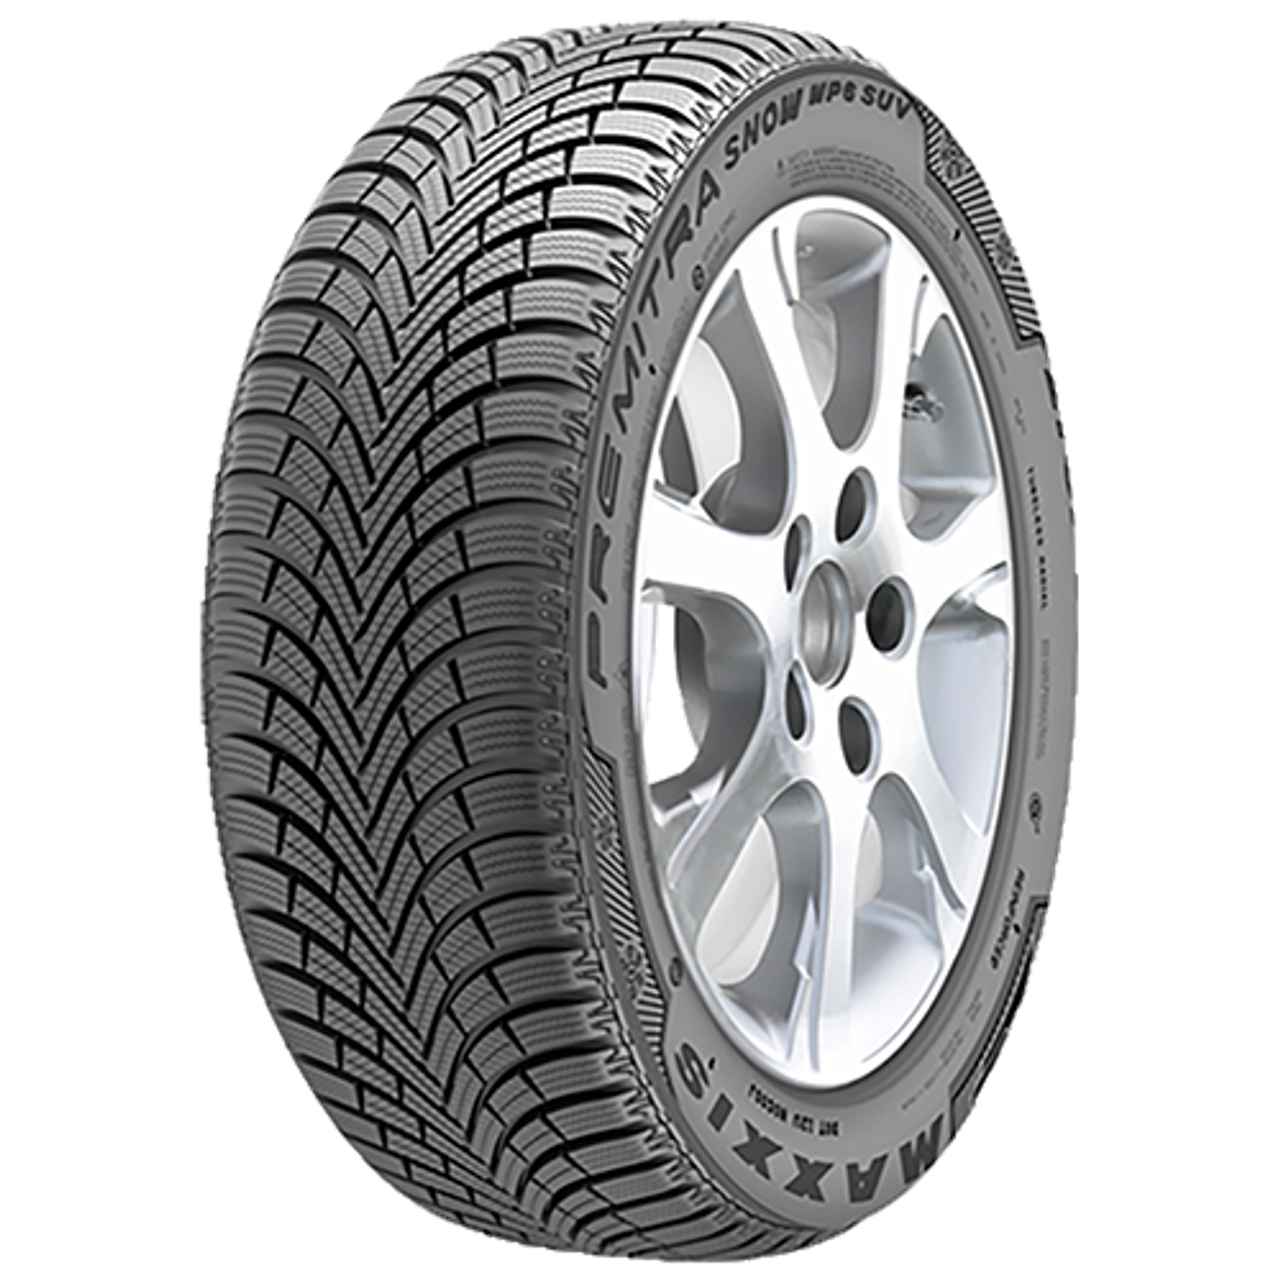 MAXXIS PREMITRA SNOW WP6 SUV 235/60R18 107H BSW XL